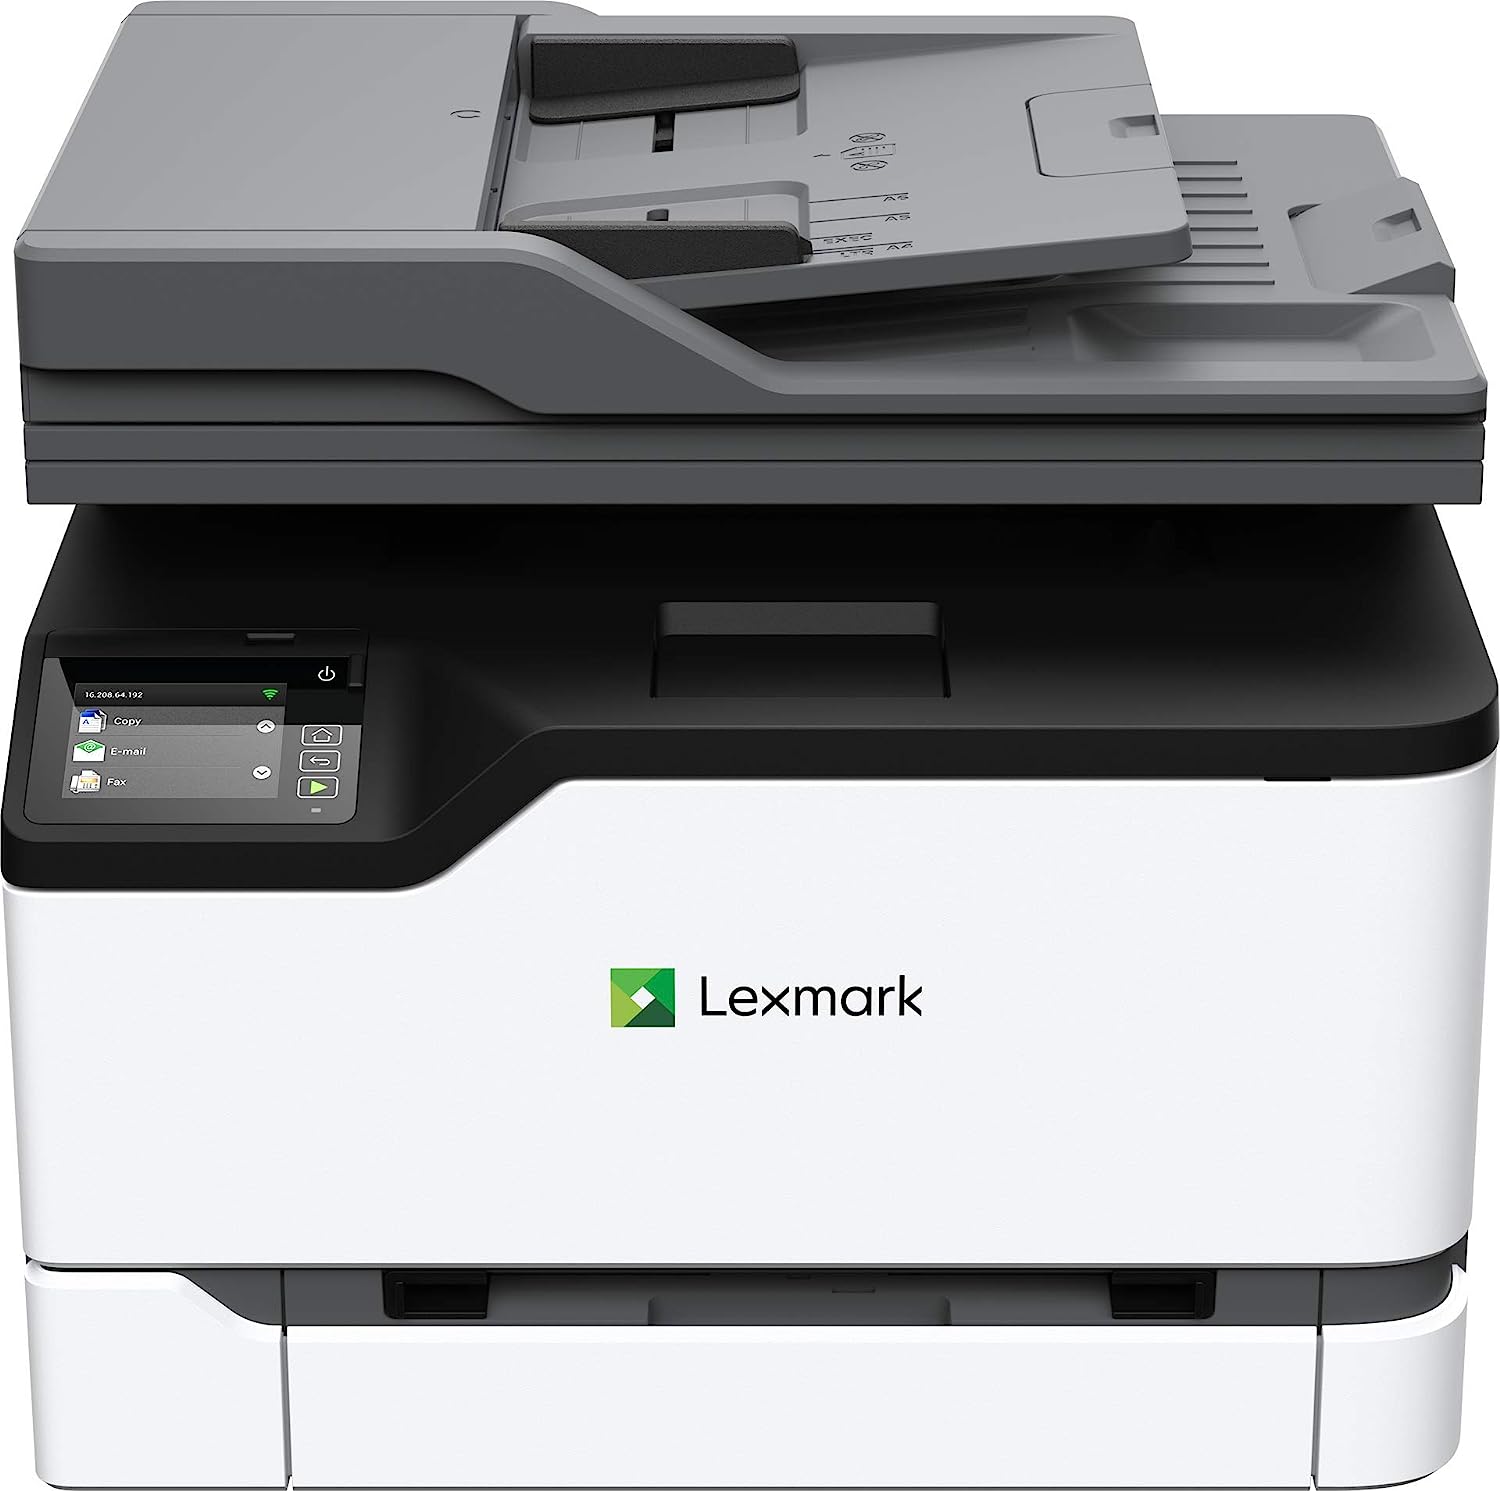 Lexmark MC3326i Color All-in-One Printer with [...]